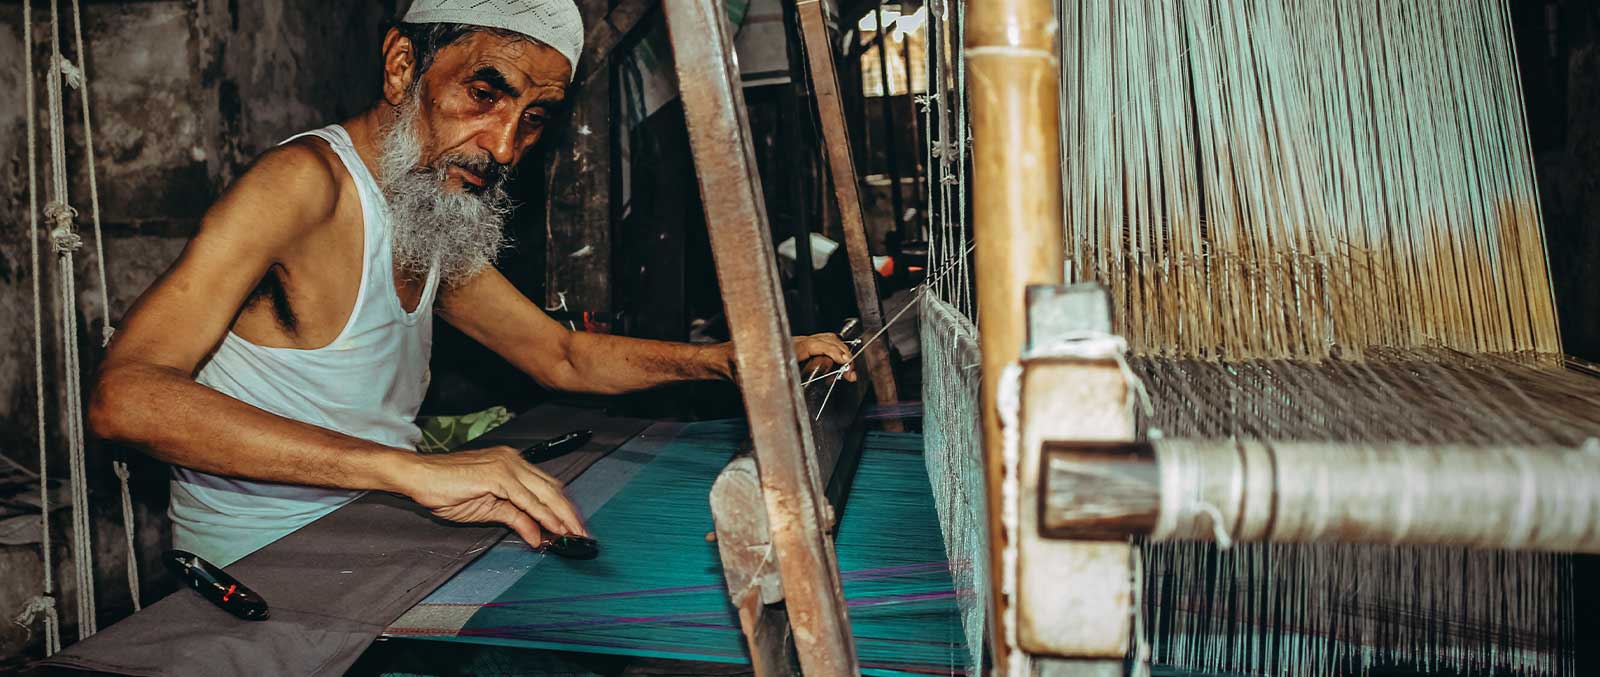 an old man is weaving thread on loom in the past era